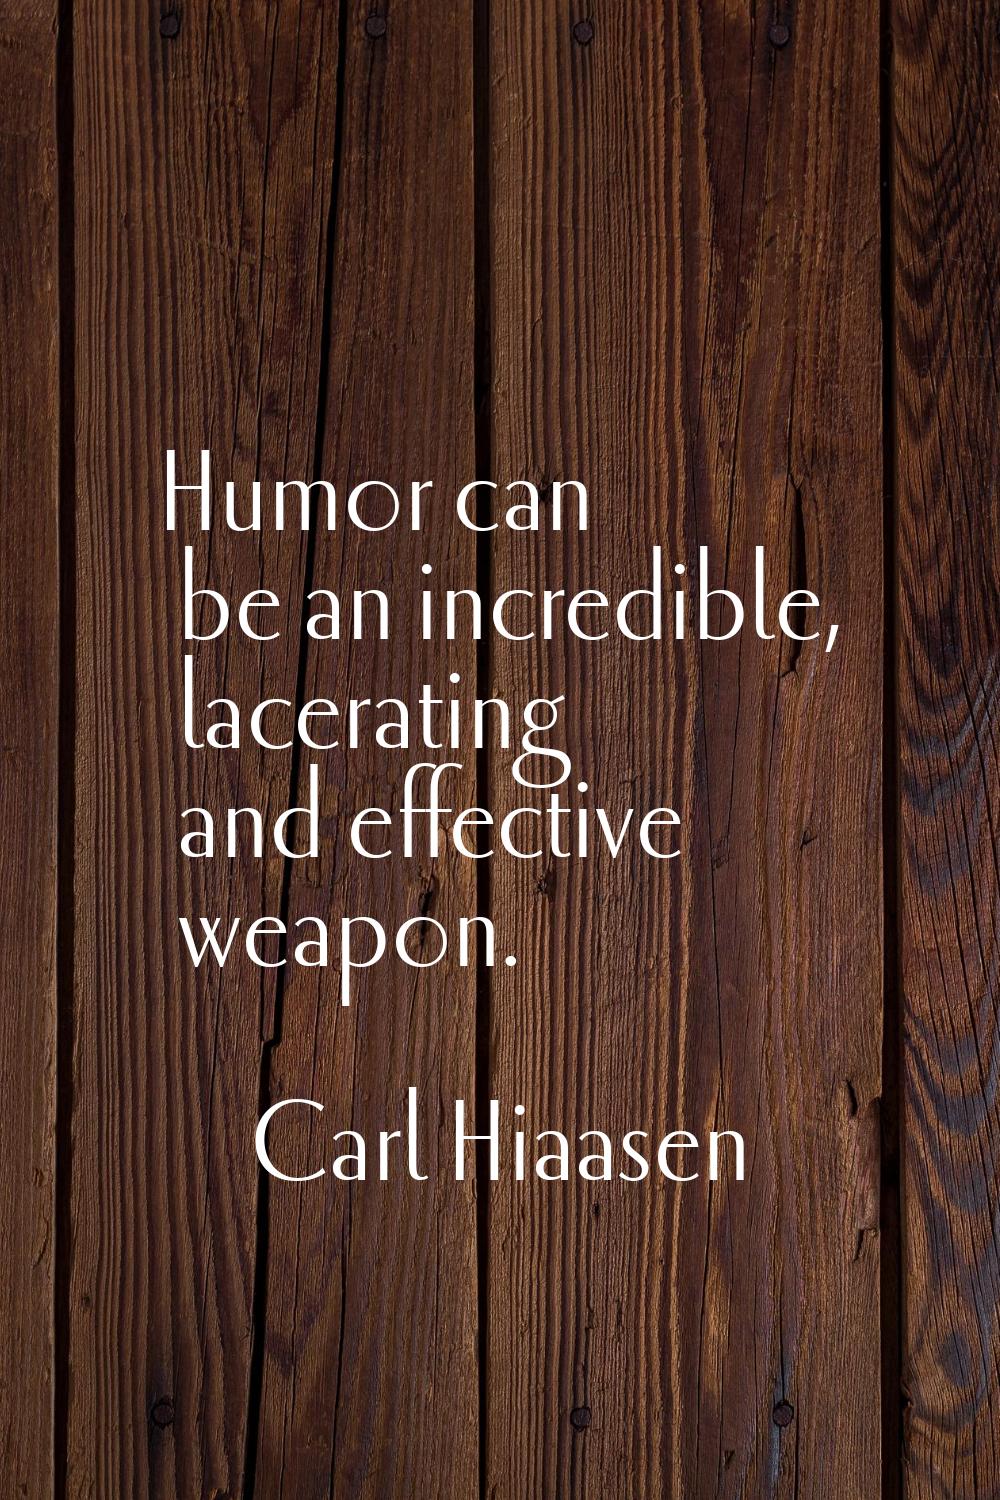 Humor can be an incredible, lacerating and effective weapon.